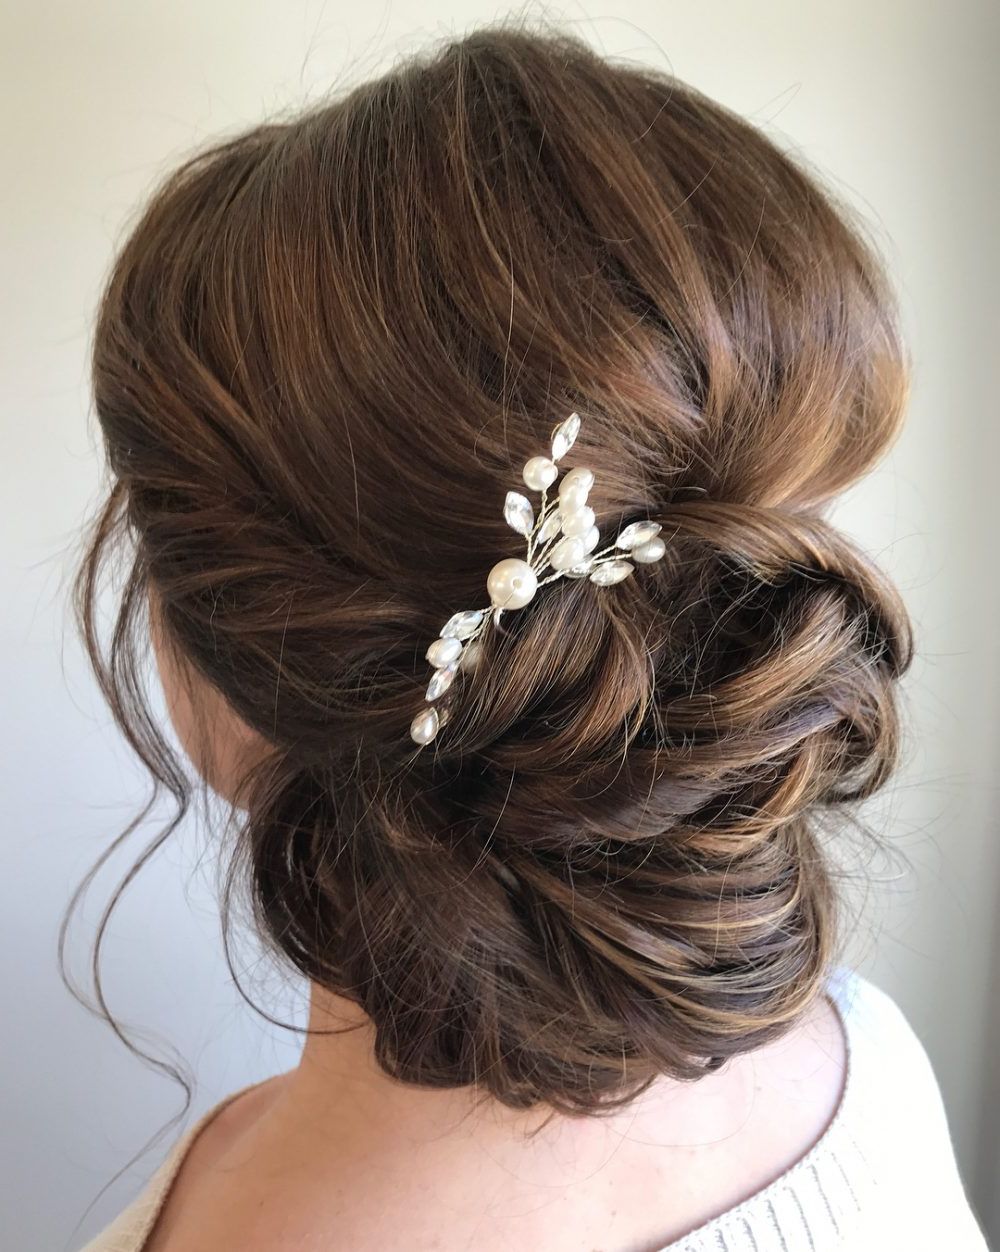 33 Breathtaking Loose Updos That Are Trendy For 2019 Throughout Preferred Airy Curly Updos For Wedding (View 14 of 20)